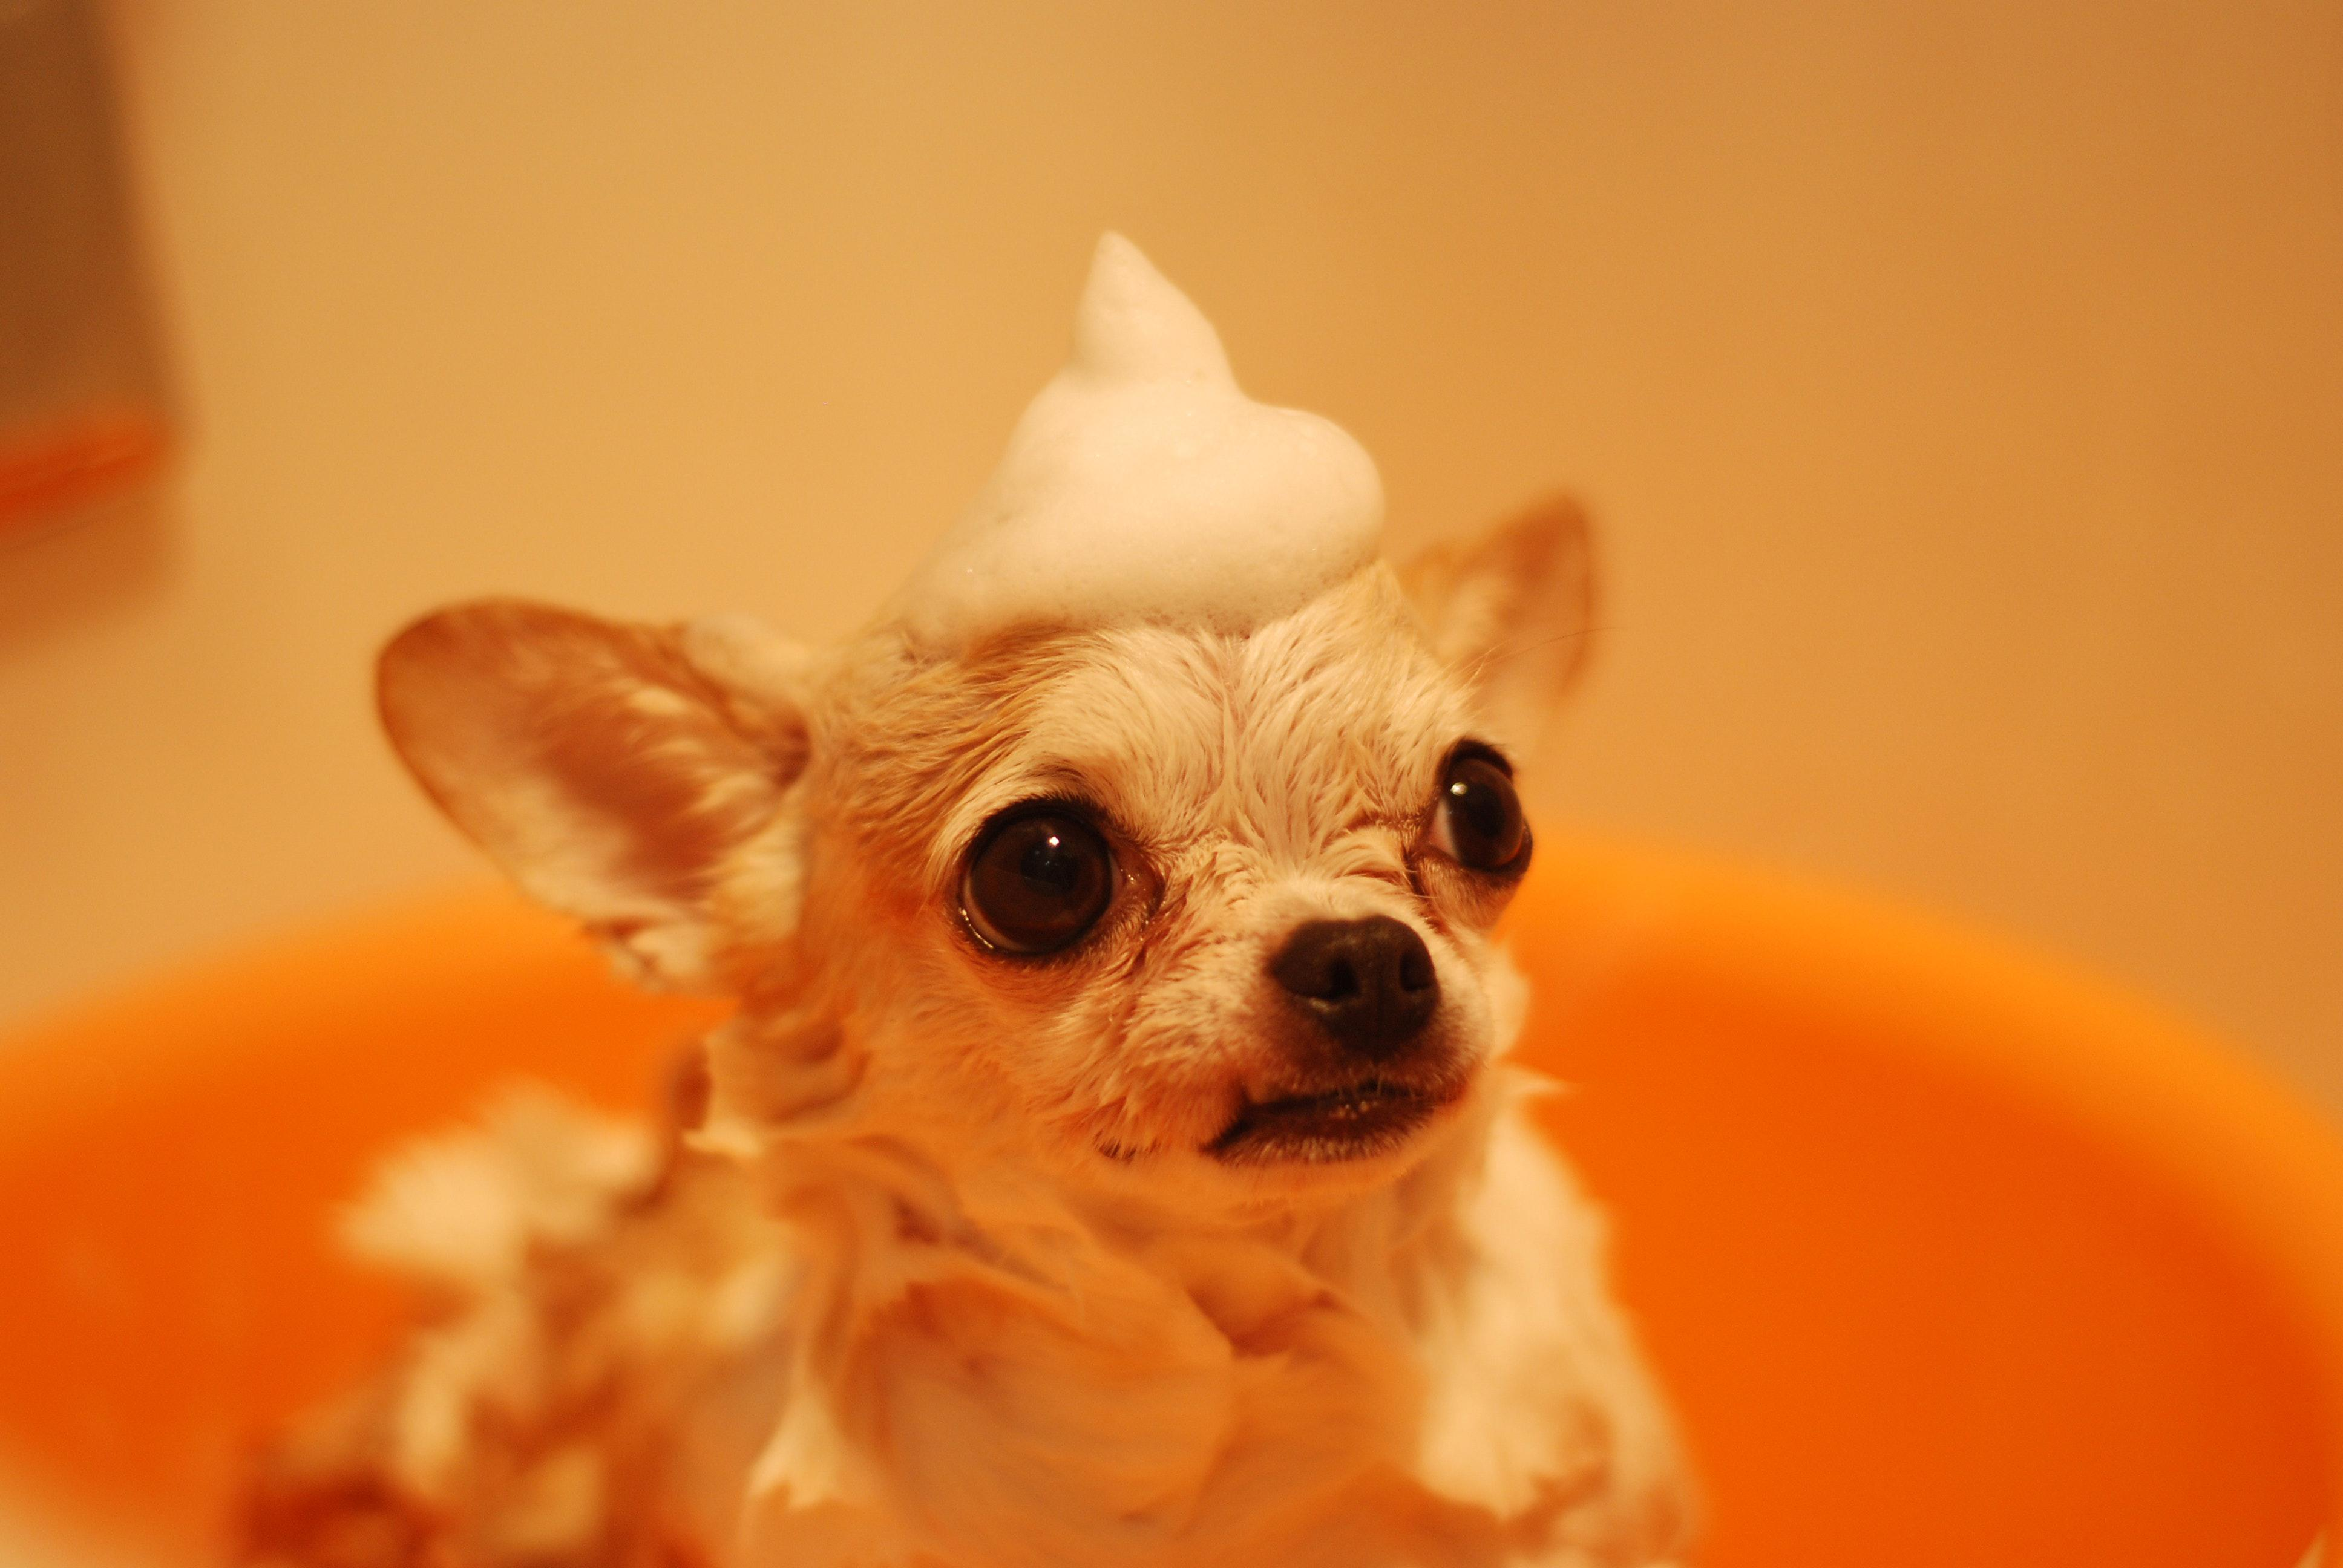 The Sweet Treat: Can Chihuahuas Enjoy Peanut Butter?